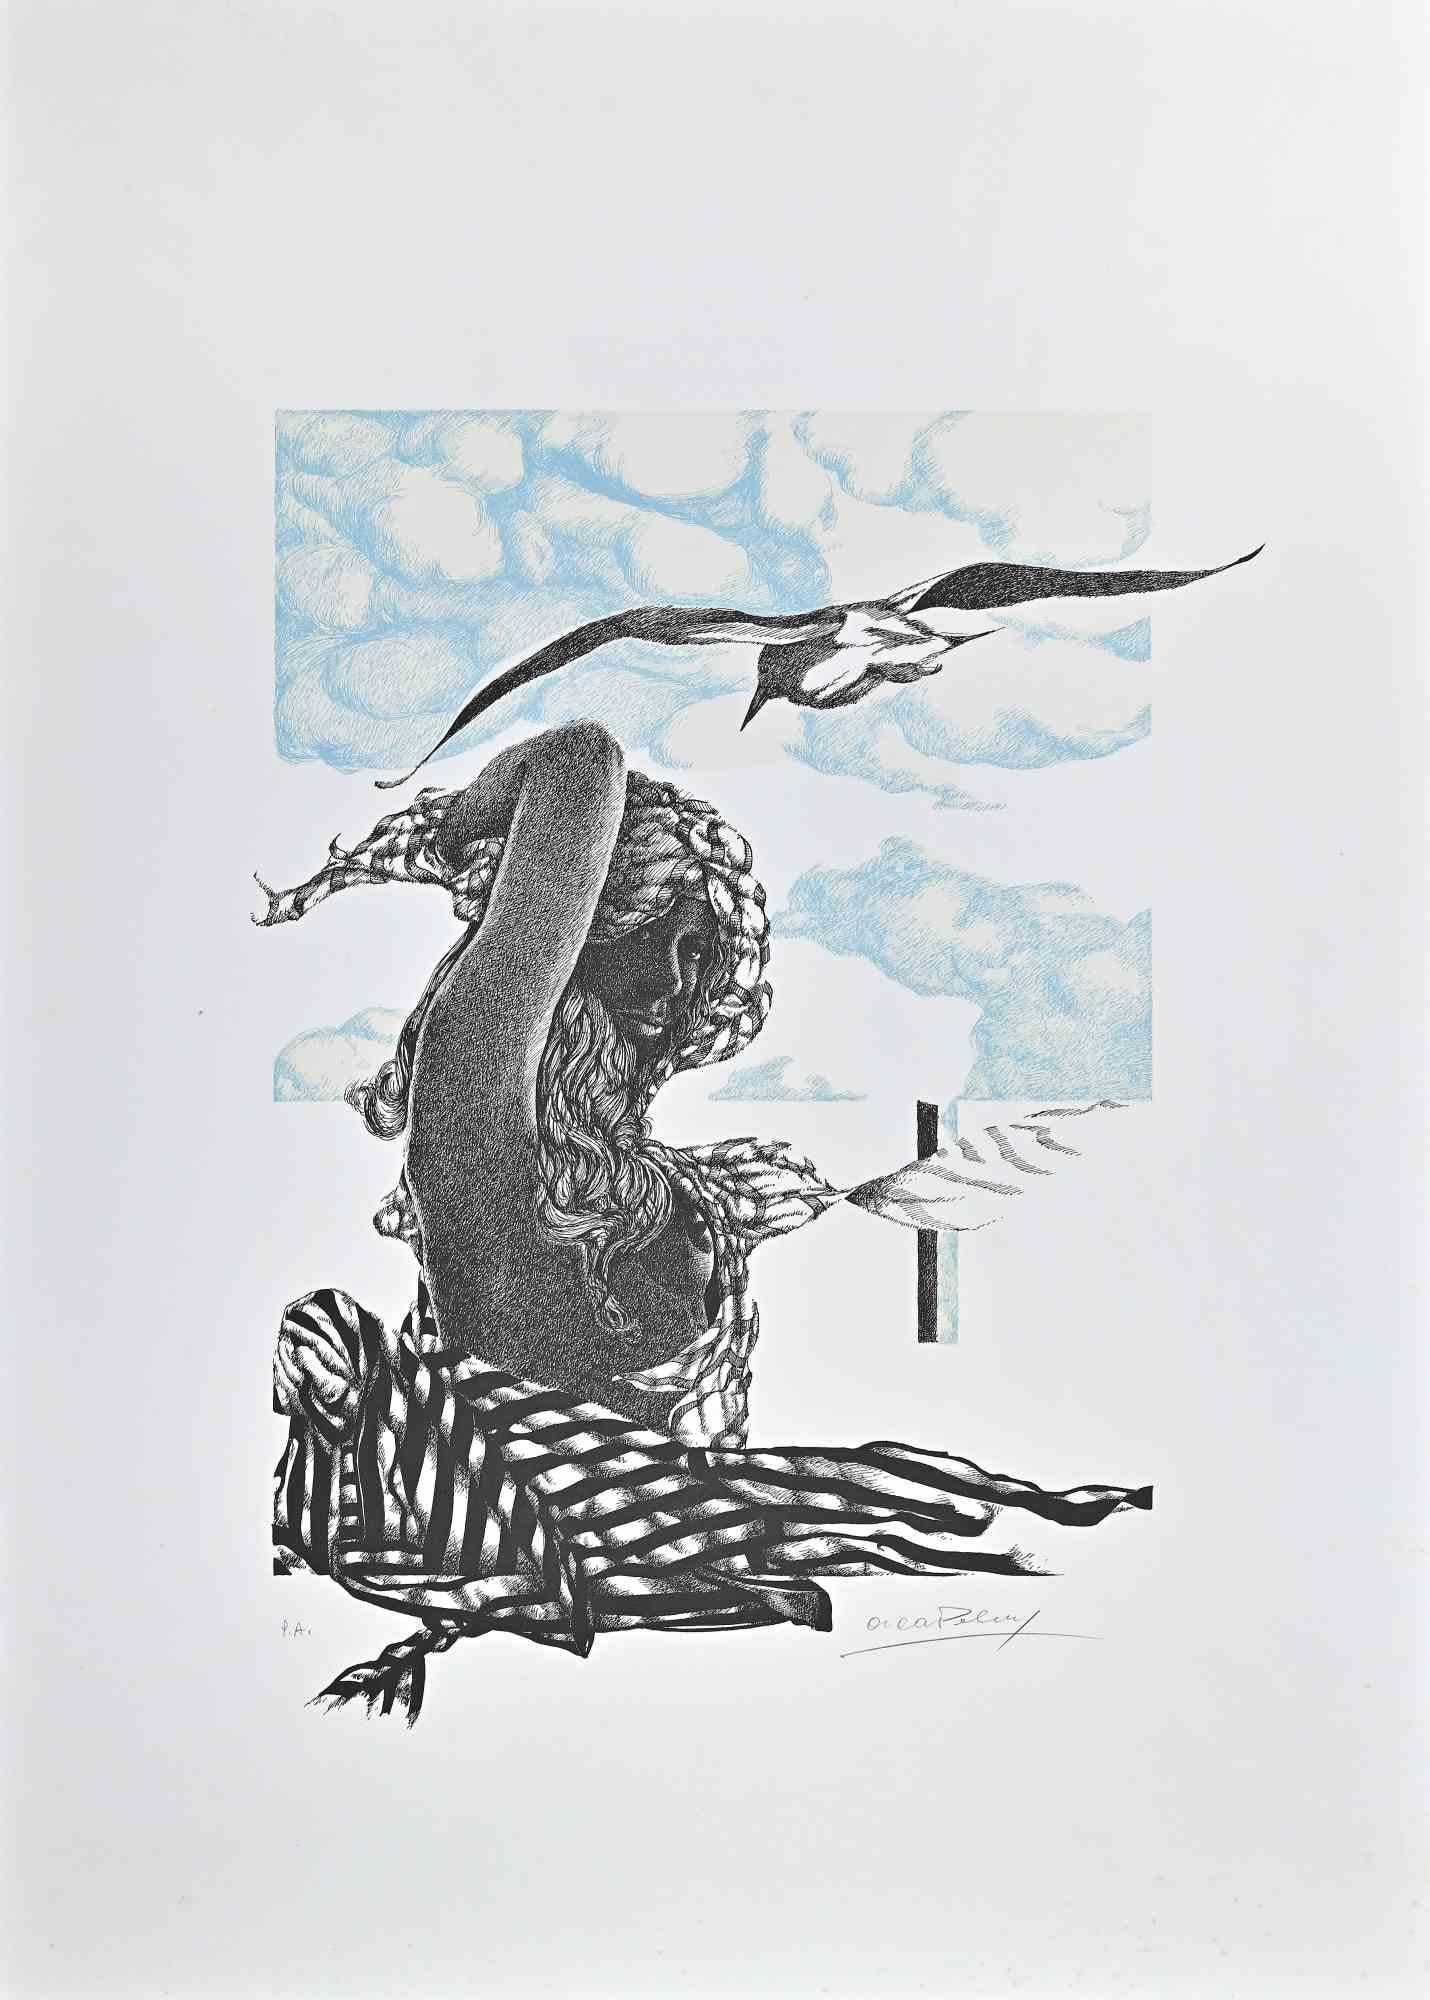 The Woman With Bird is an original colored  Lithograph realized by Oscar Pelosi during the 1980s .

The artwork is hand-signed in pencil by the artist on the lower right. Numbered, on the lower left.

Good conditions on a white cardboard.

With the